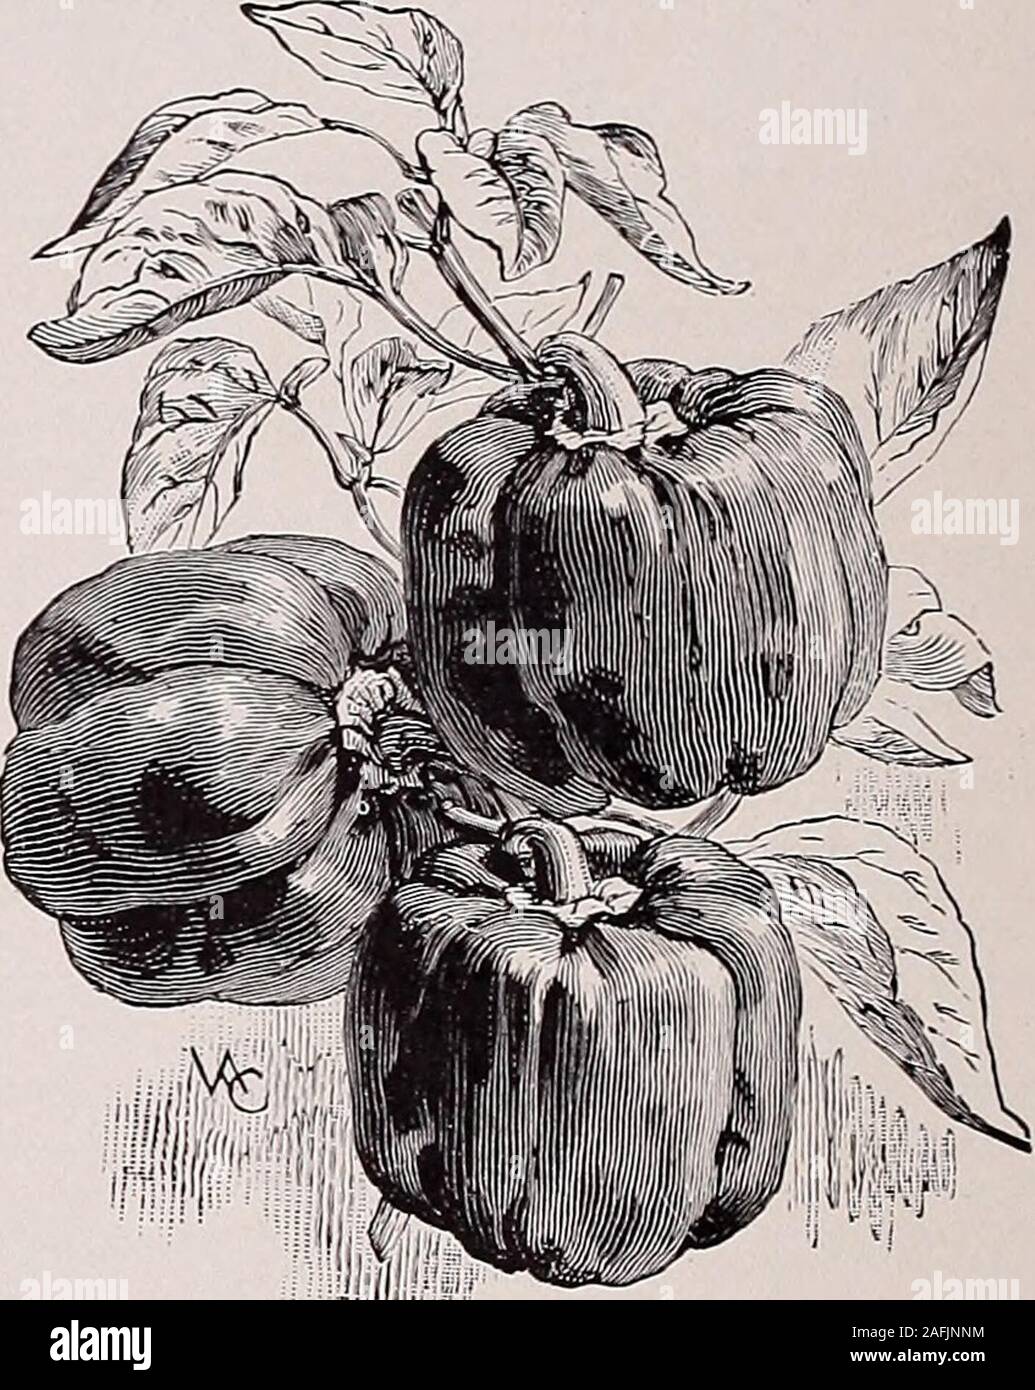 . Beckert's garden, flower and lawn seeds. ds.Pkt. 5 cts., oz. 30 cts. CHINESE GIANT. Of enor-mous size, early and very productive;fruit bright scarlet and of thick blockyform; flesh thick and extremely mild.Pkt. 5 cts., oz. 45 cts. RUBY KING. Bright red pods,about 5 inches long and 3 or 4 inchesthick; mild and pleasant in flavor.Pkt. 5 cts., oz. 30 cts. SWEET MOUNTAIN. Enor-mous mild-flavored pods, much usedcts., oz. 30 cts. RUBY GIANT. and color of the forme A cross between Ruby King and Chinese Giant, retaining the shapewith the size of the latter. Pkt. 5 cts., oz. 30 cts. NEAPOLITAN. Earli Stock Photo